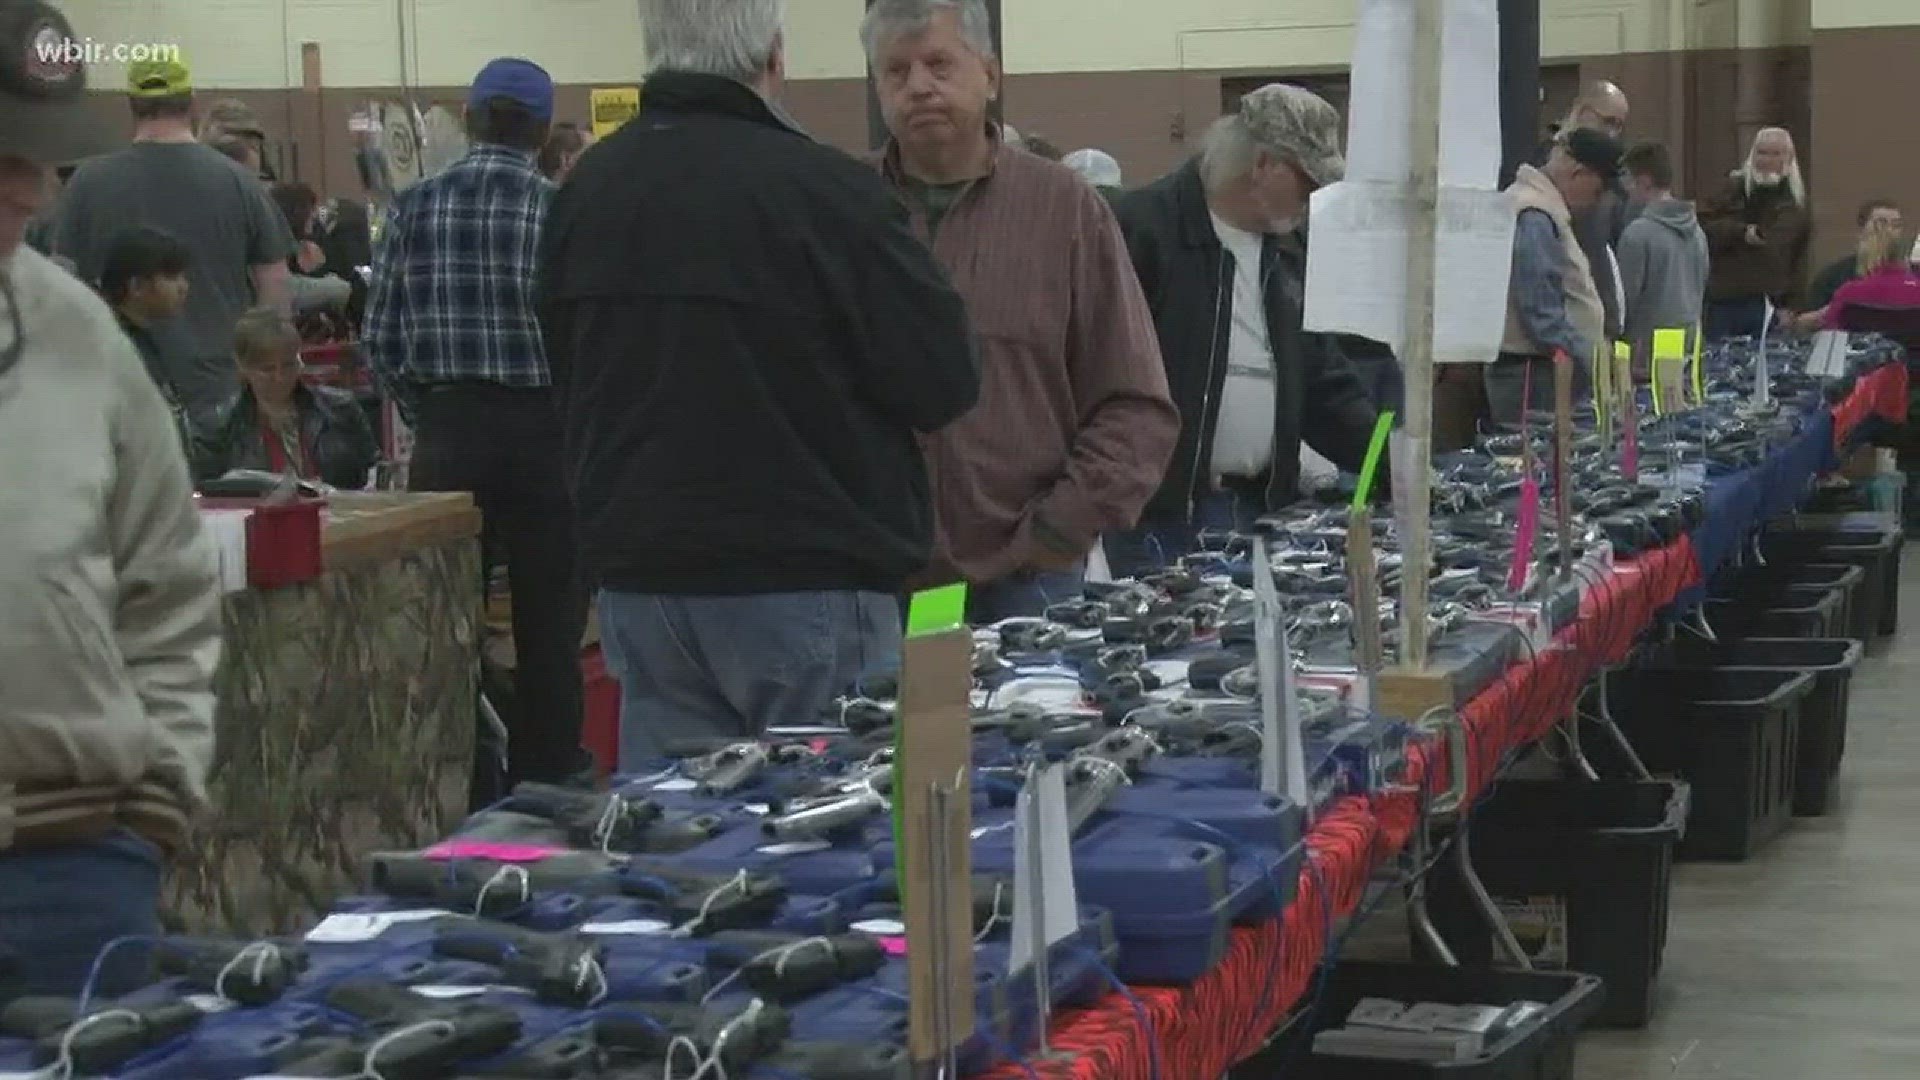 The Knoxville Gun Expo is happening this weekend. 10News Reporter Shannon Smith spoke to people who do not want to see their rights to own firearms infringed and spoke with other victims of gun violence.